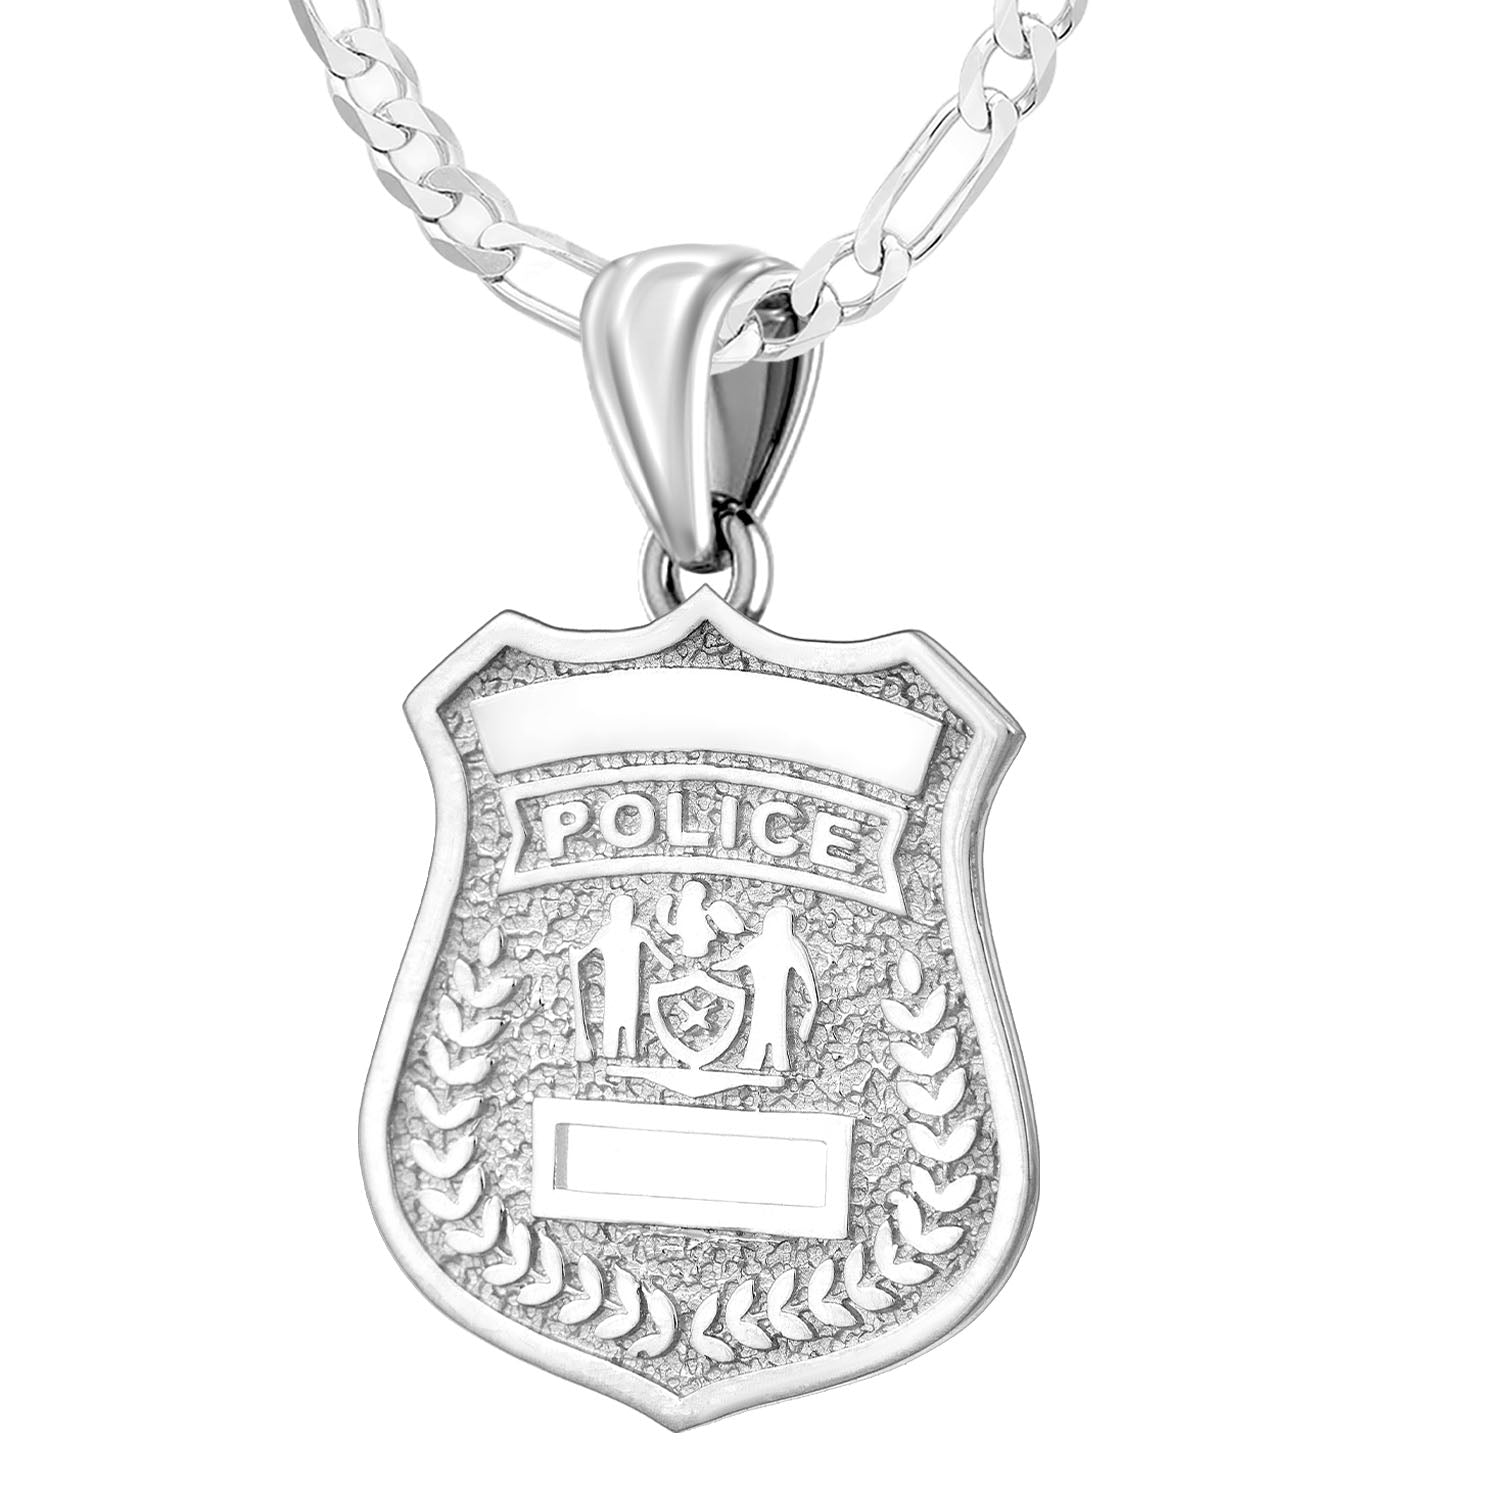 Police Officer Gifts * Police Gift * Police Badge Necklace * Personalized Police Badge Retirement Necklace with Any Number & Dept